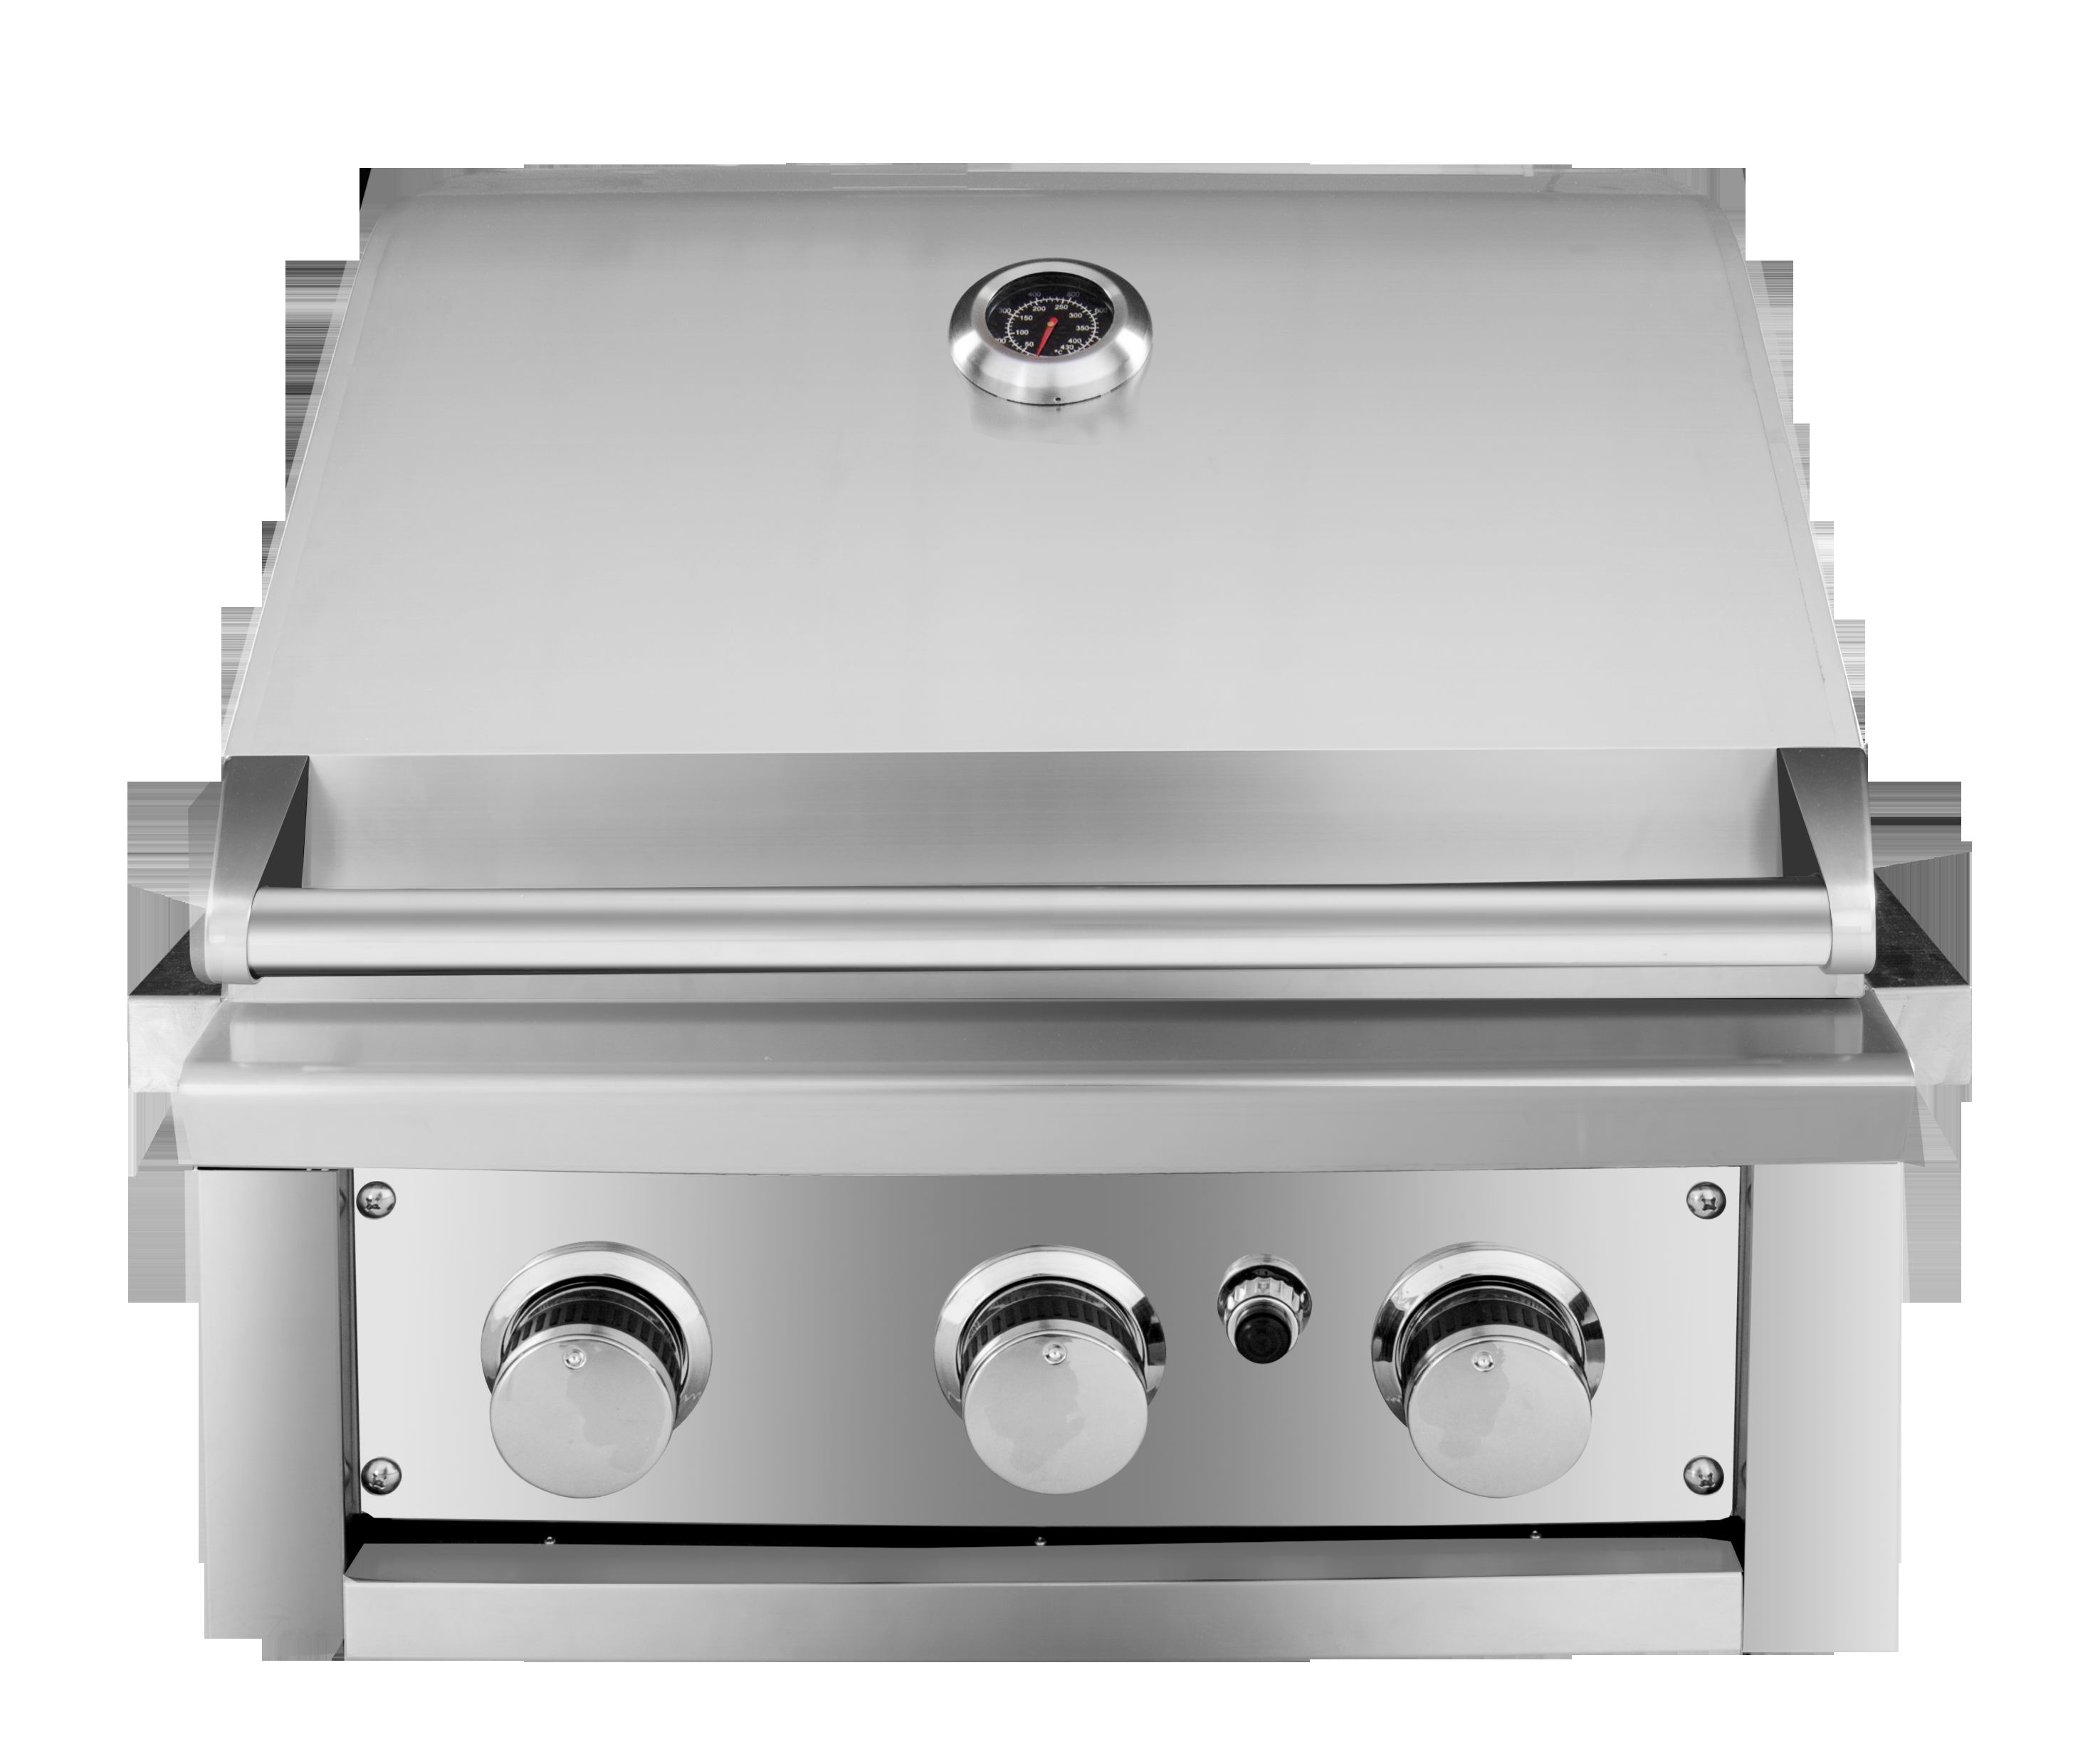 High quality deluxe built-in gas grill